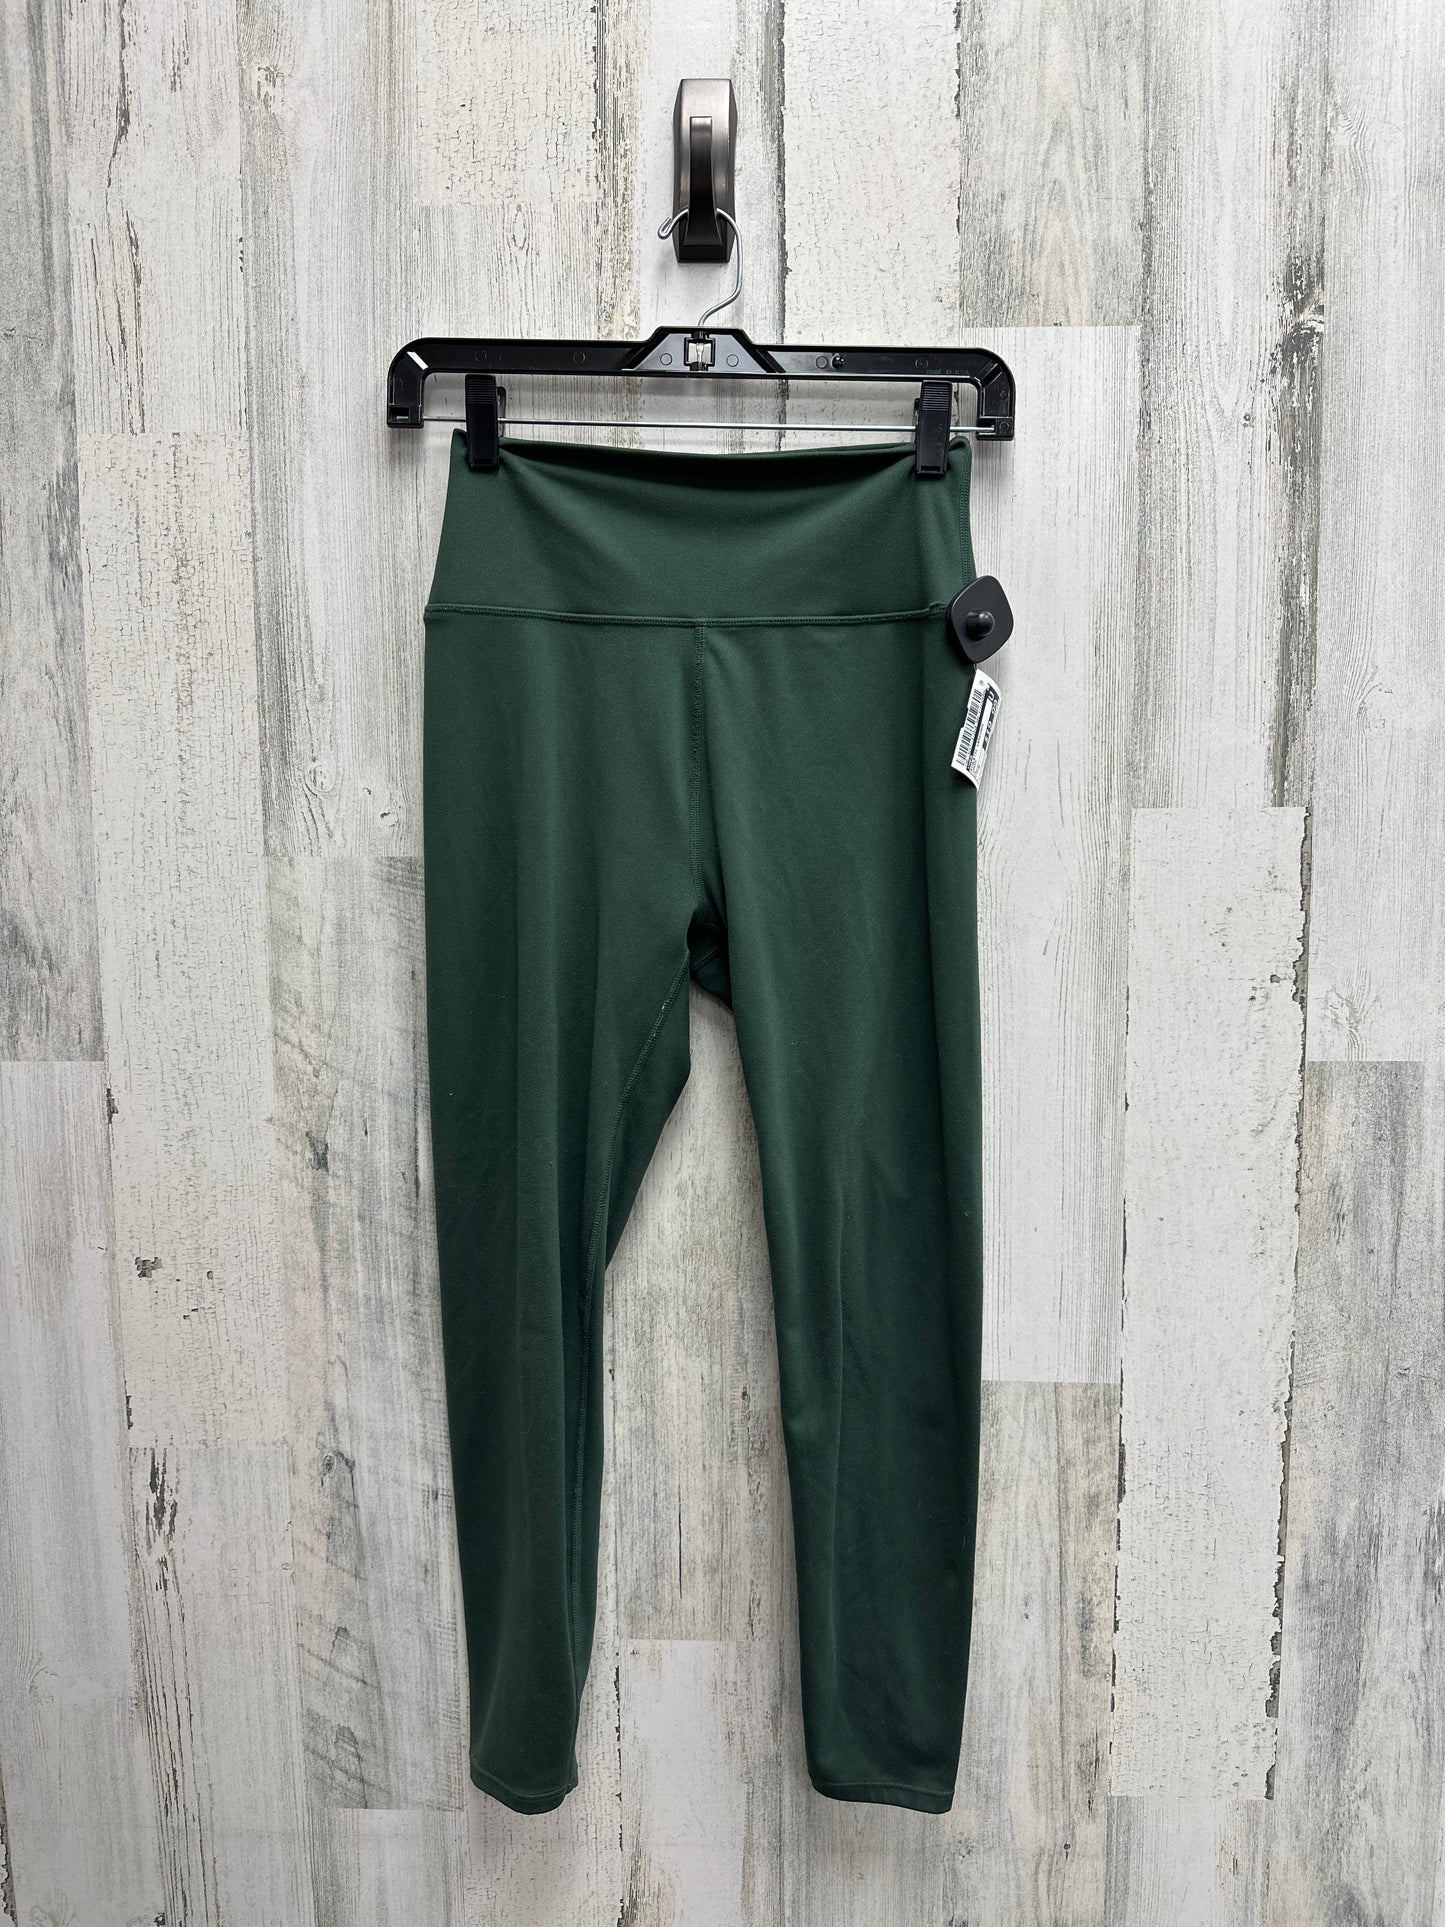 Athletic Leggings By Sage  Size: M